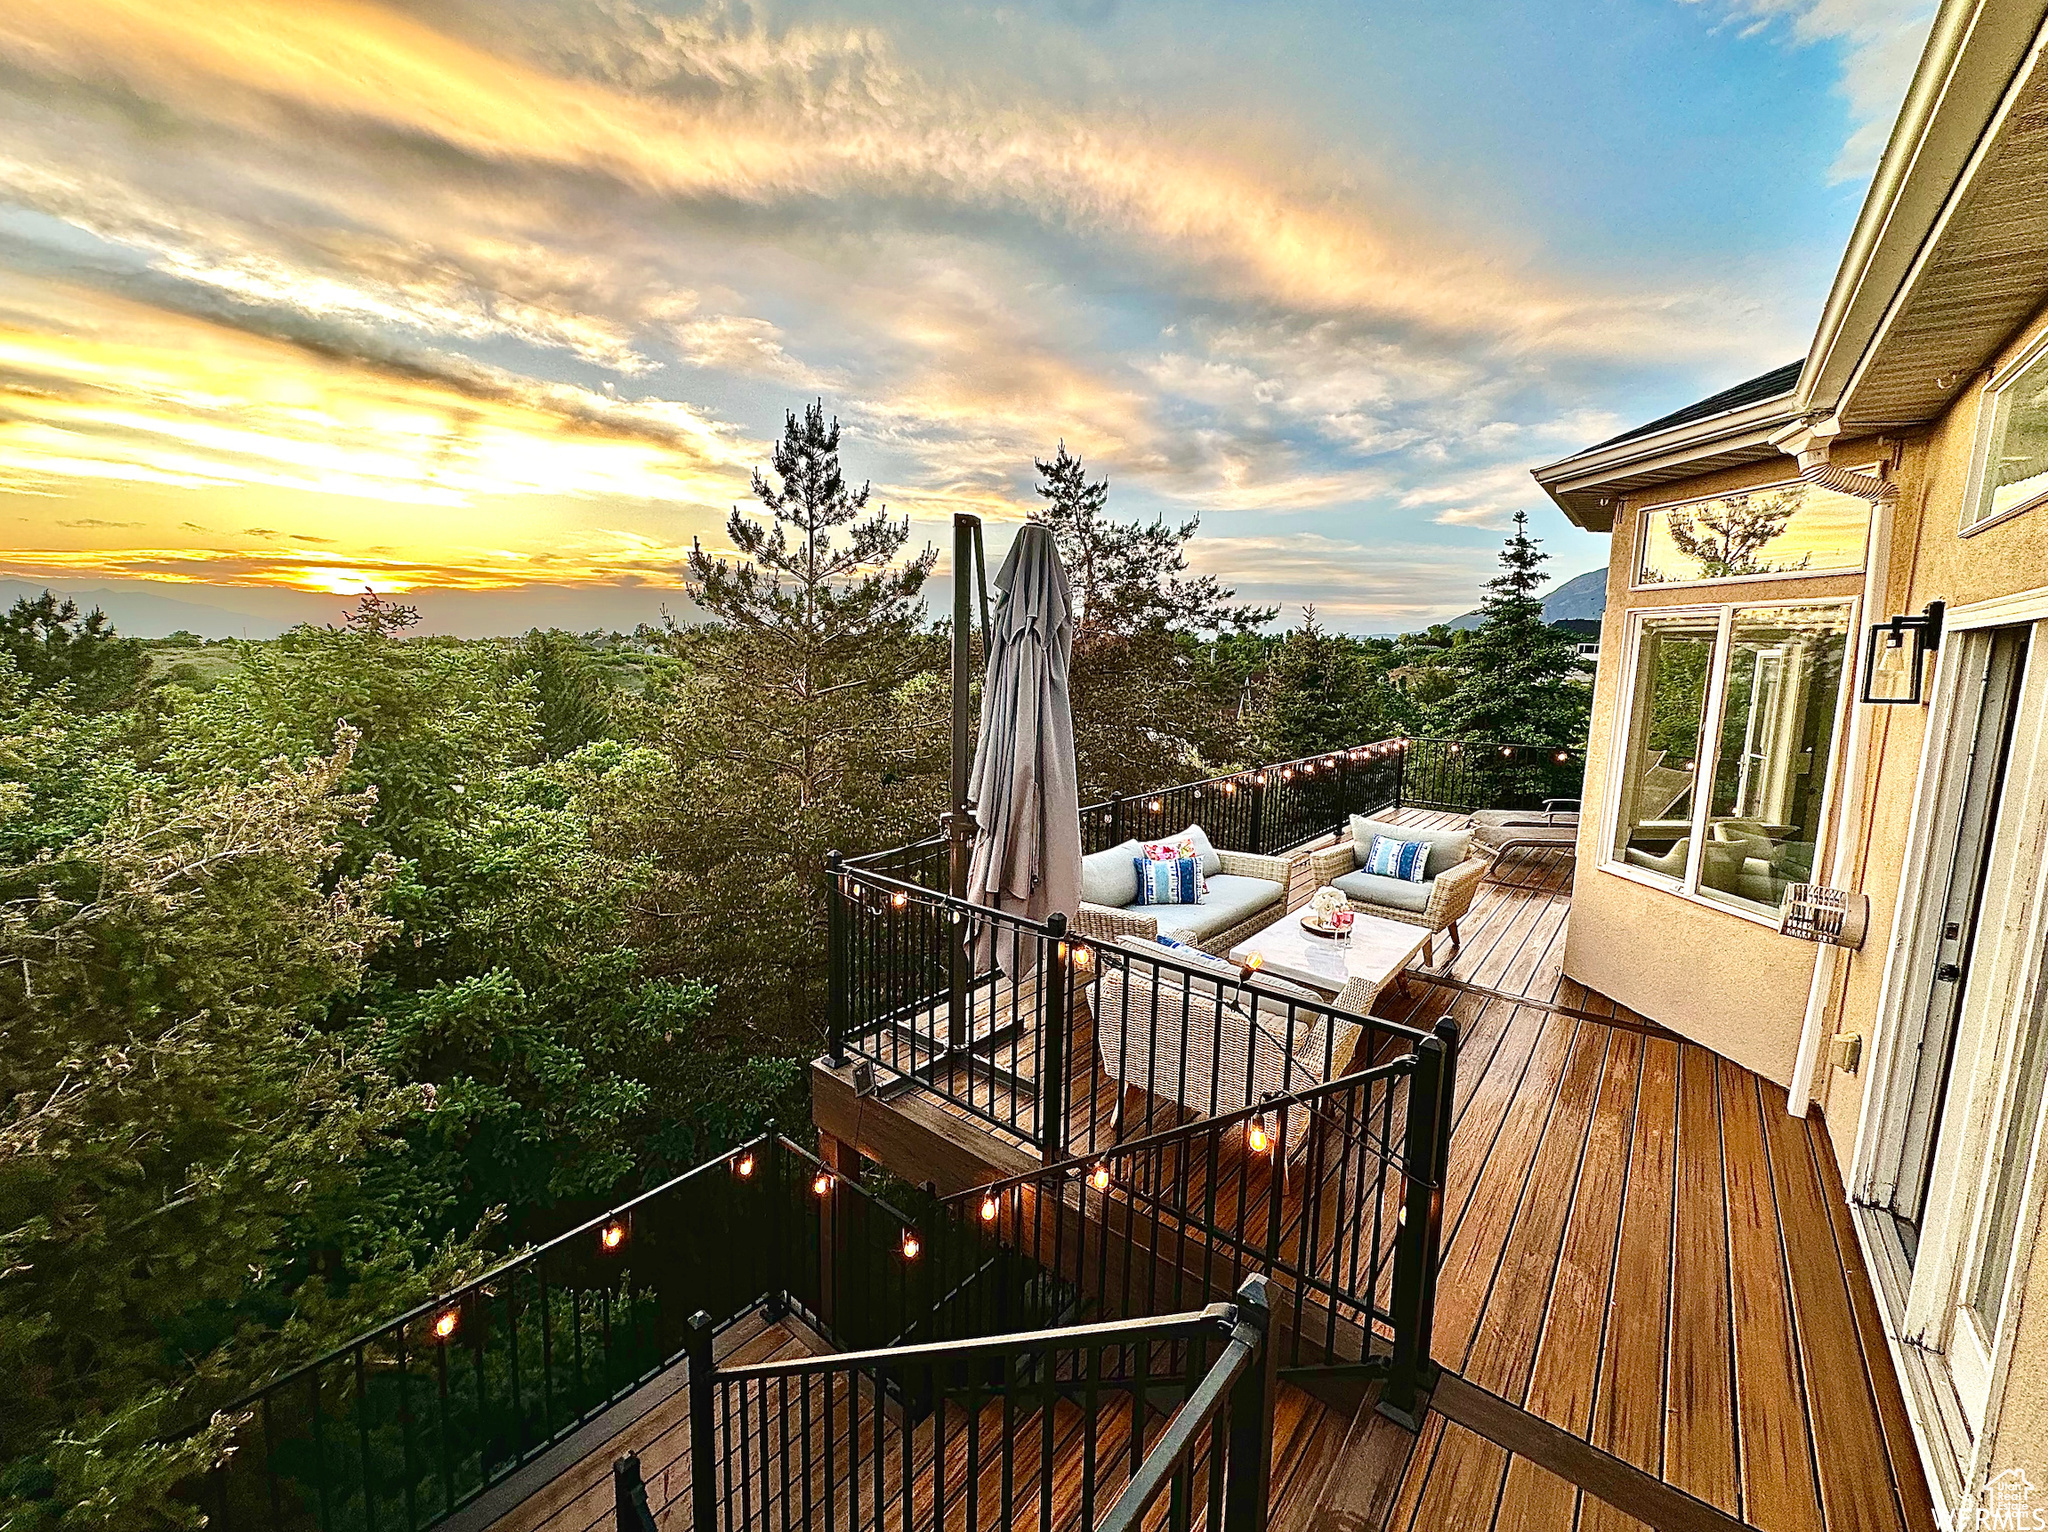 Breathtaking views from back deck